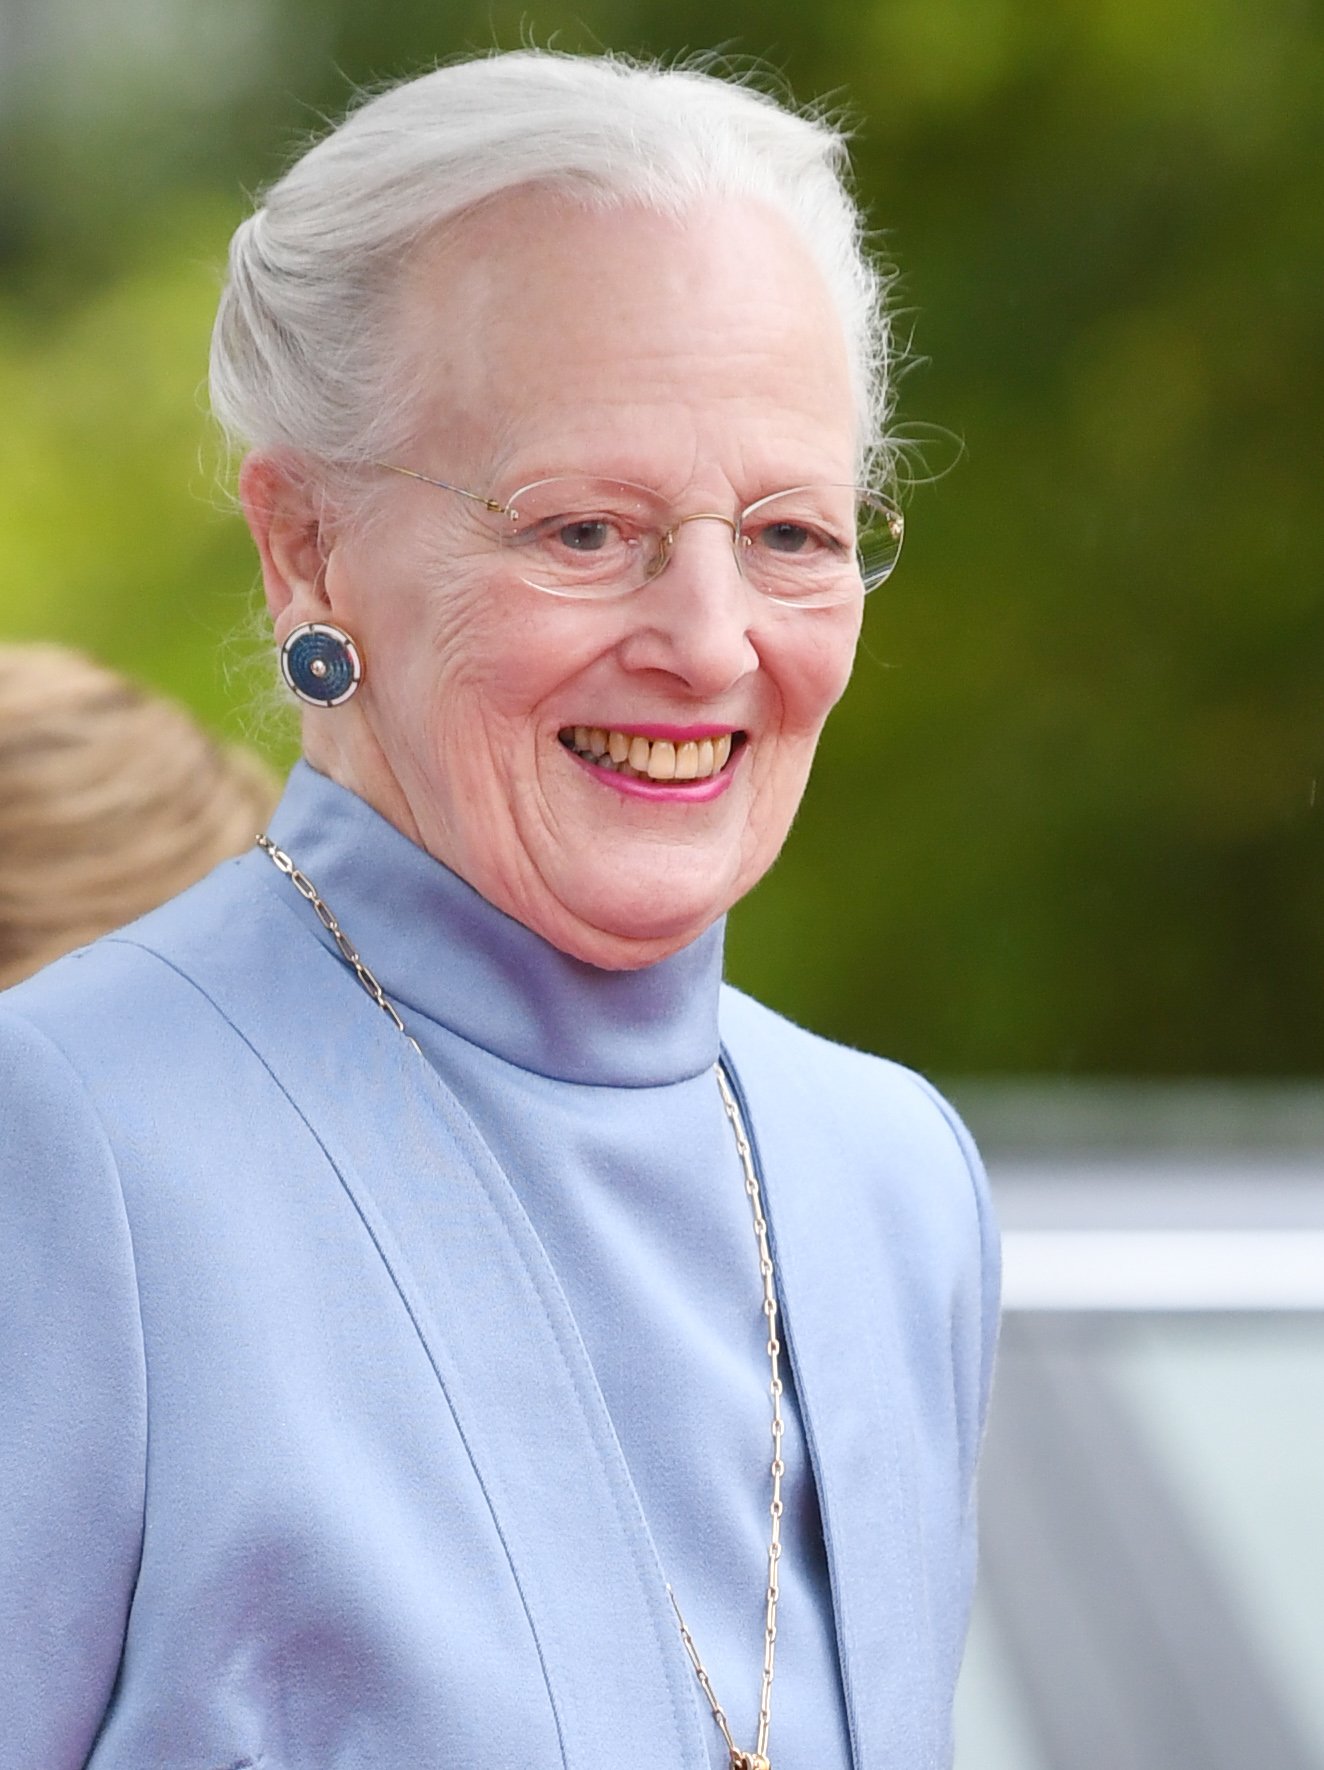 Queen Margrethe of Denmark arrives at Nordens Hus as the recipient of this year's Nordic Association's Language Awards on September 26, 2022, in Oslo, Norway. | Source: Getty Images